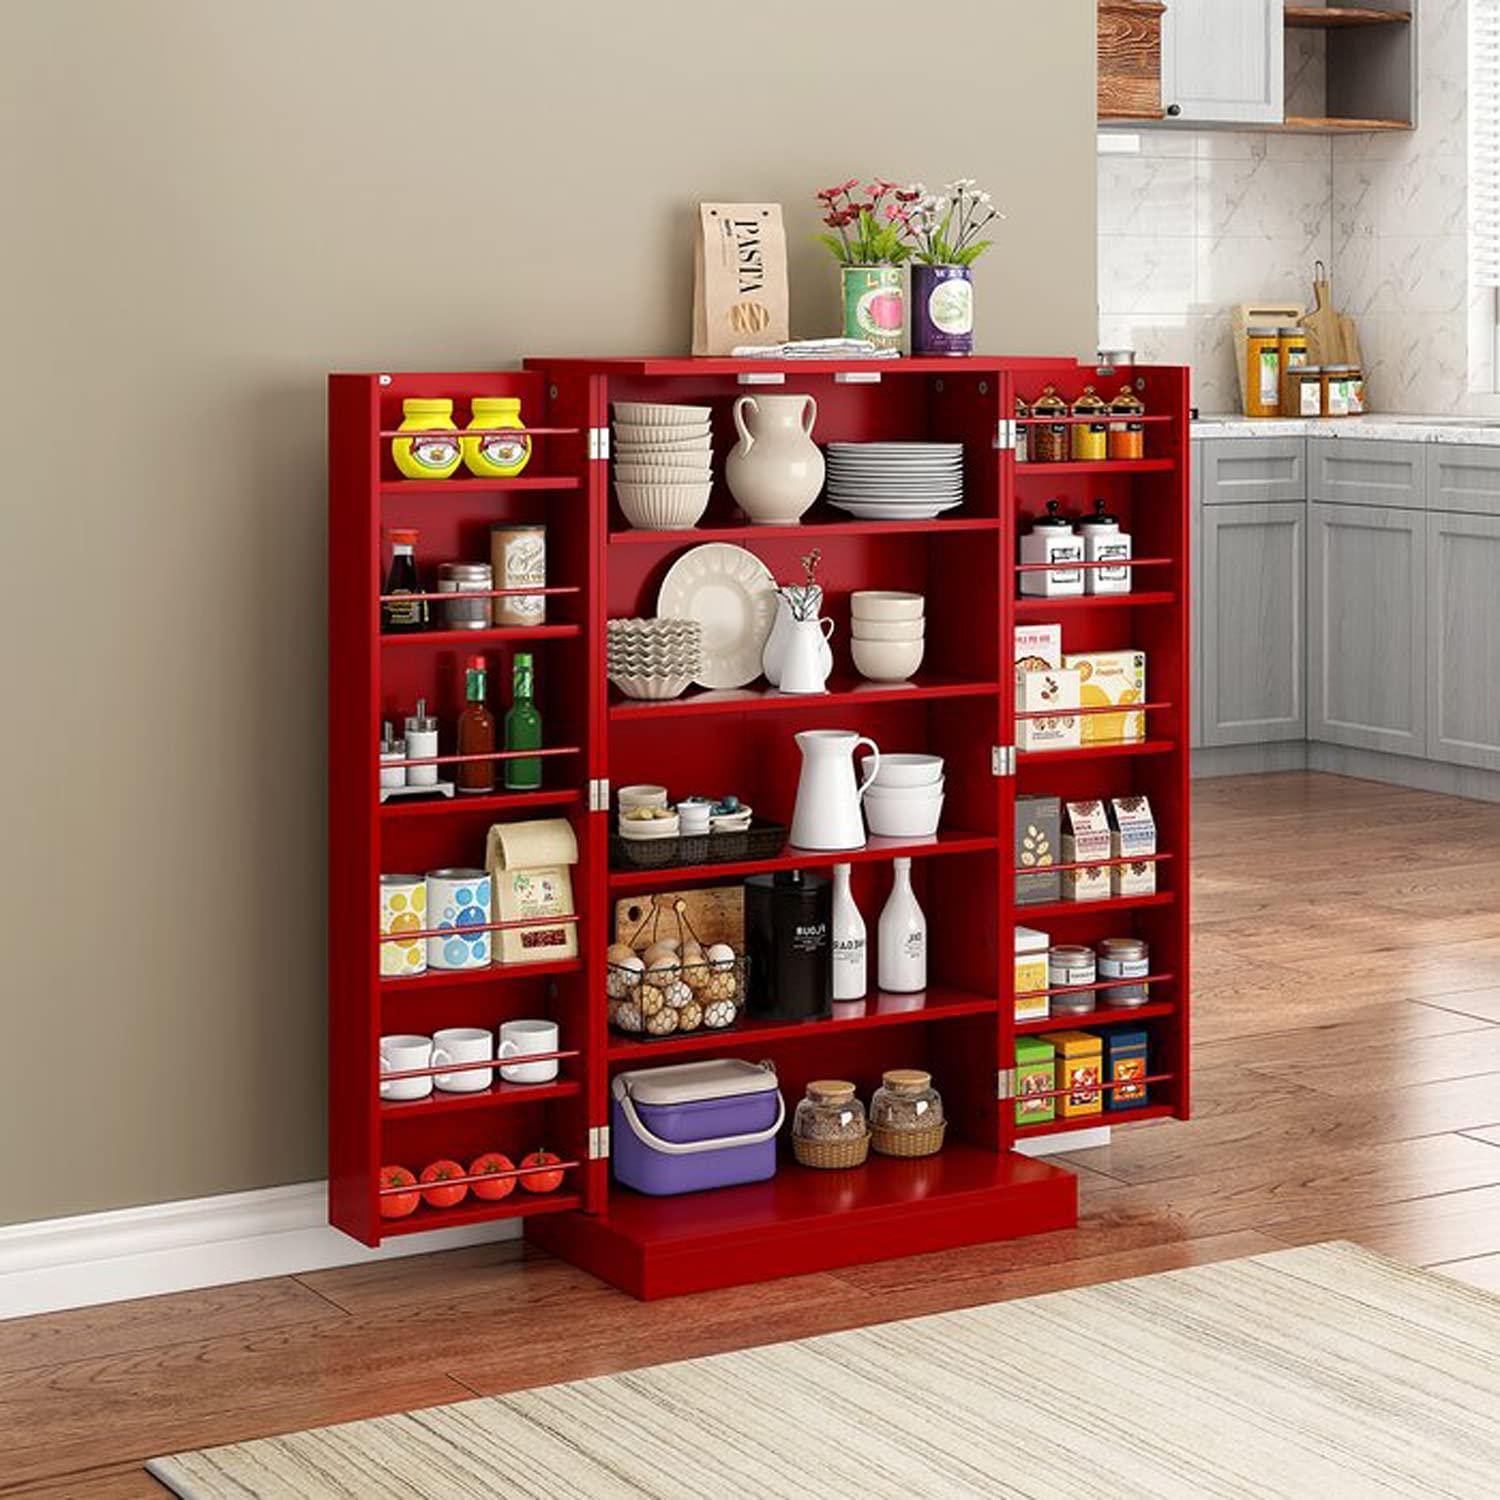 HOMEFORT 41" Kitchen Pantry, Farmhouse Pantry Cabinet, Storage Cabinet with Doors and Adjustable Shelves (Red) - image 5 of 5